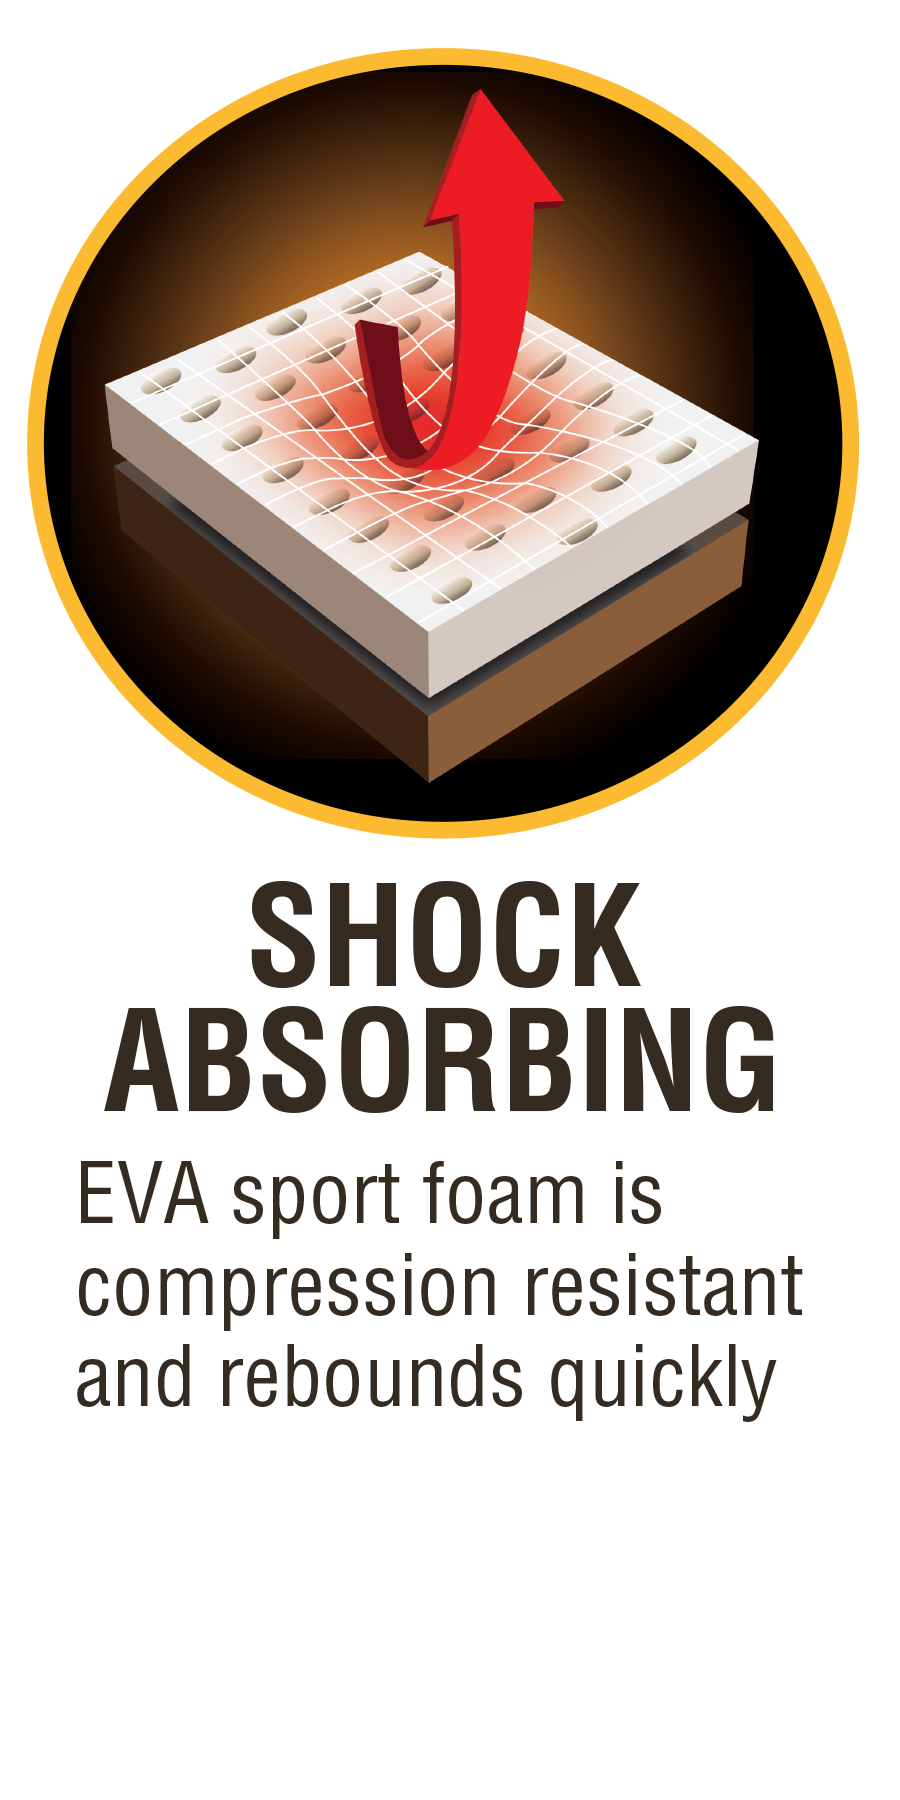 Shock Absorbing EVA sport foam is compression resistant and rebounds quickly